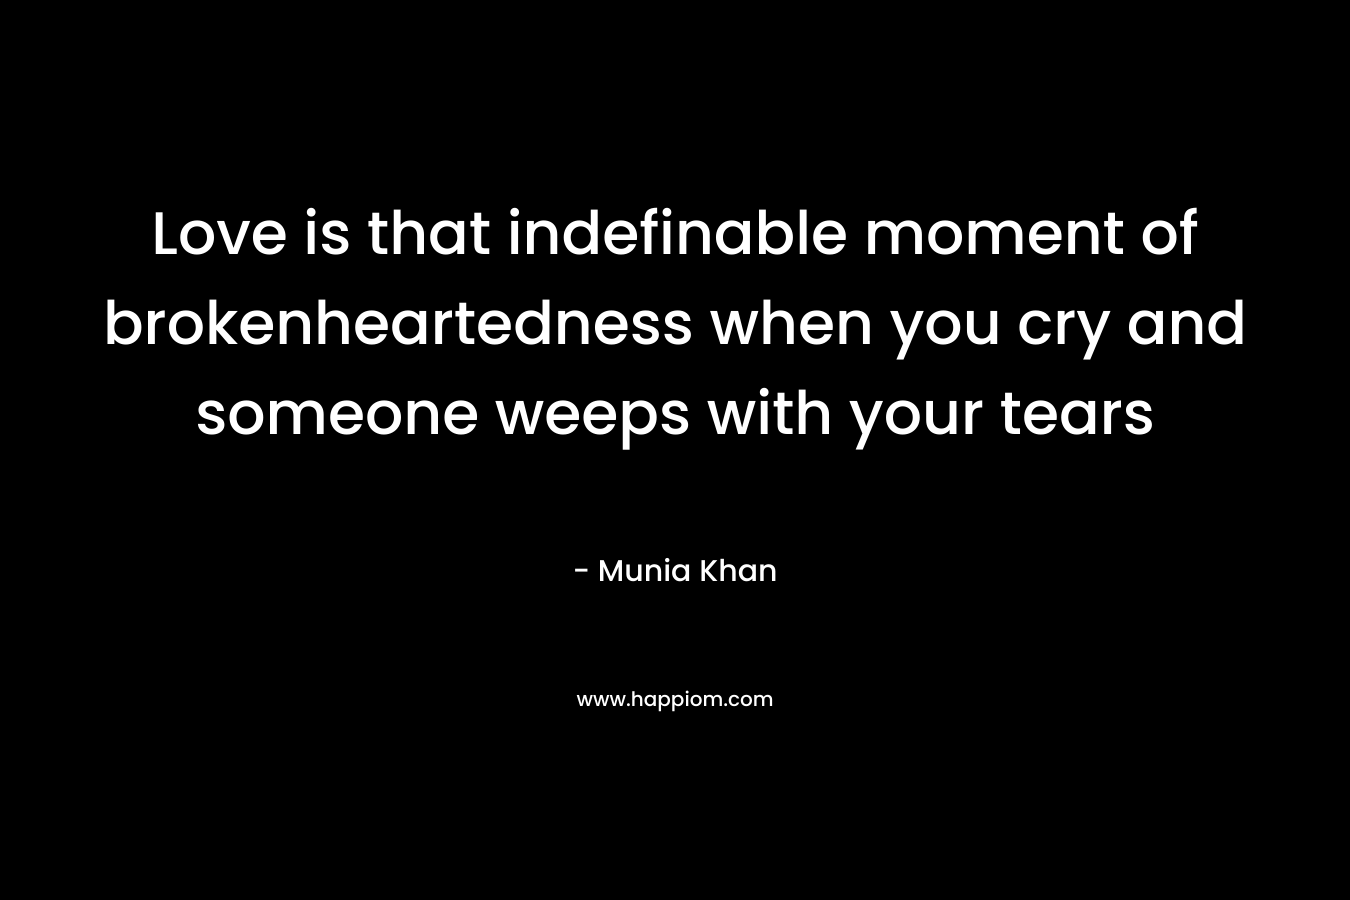 Love is that indefinable moment of brokenheartedness when you cry and someone weeps with your tears – Munia Khan